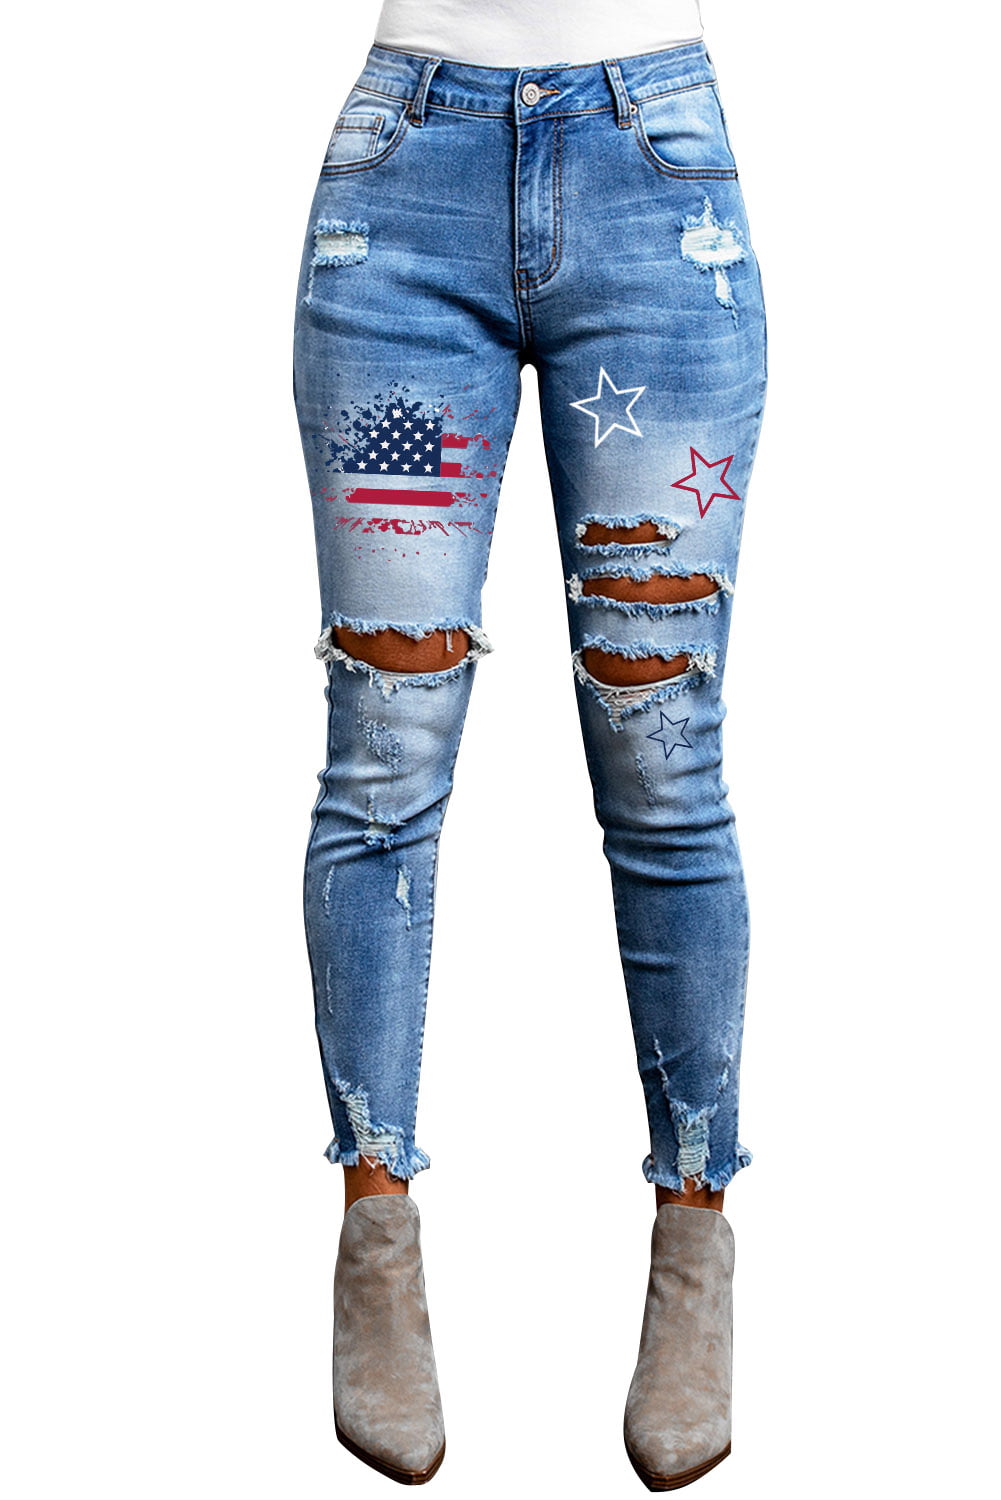 FARYSAYS Women's Ripped Skinny Jeans Distressed Straight Leg High Rise ...